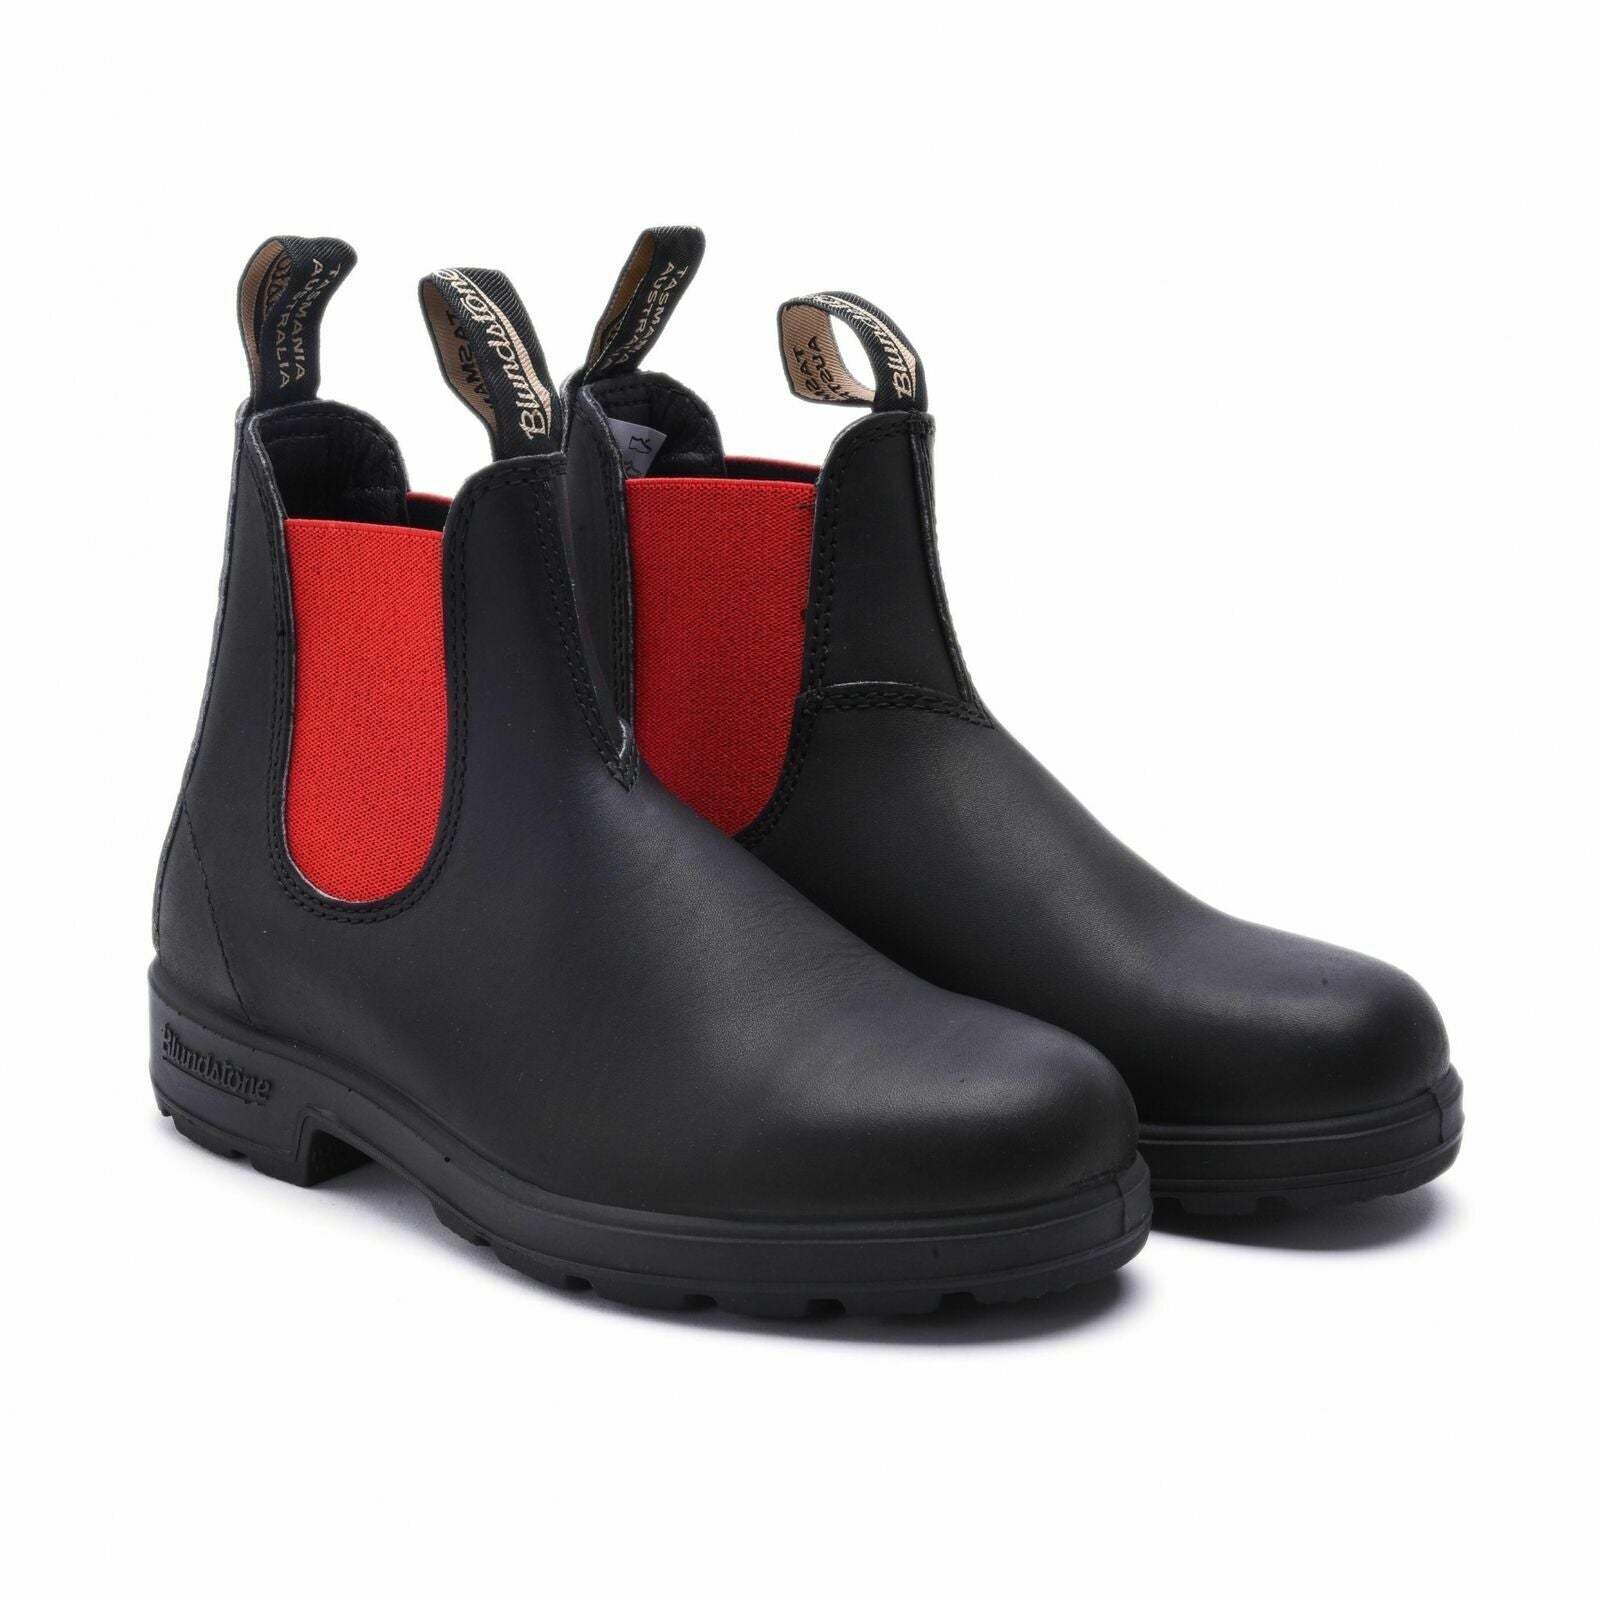 New Blundstone Style 508 Chelsea Boots - Black Leath – Wested Leather Co